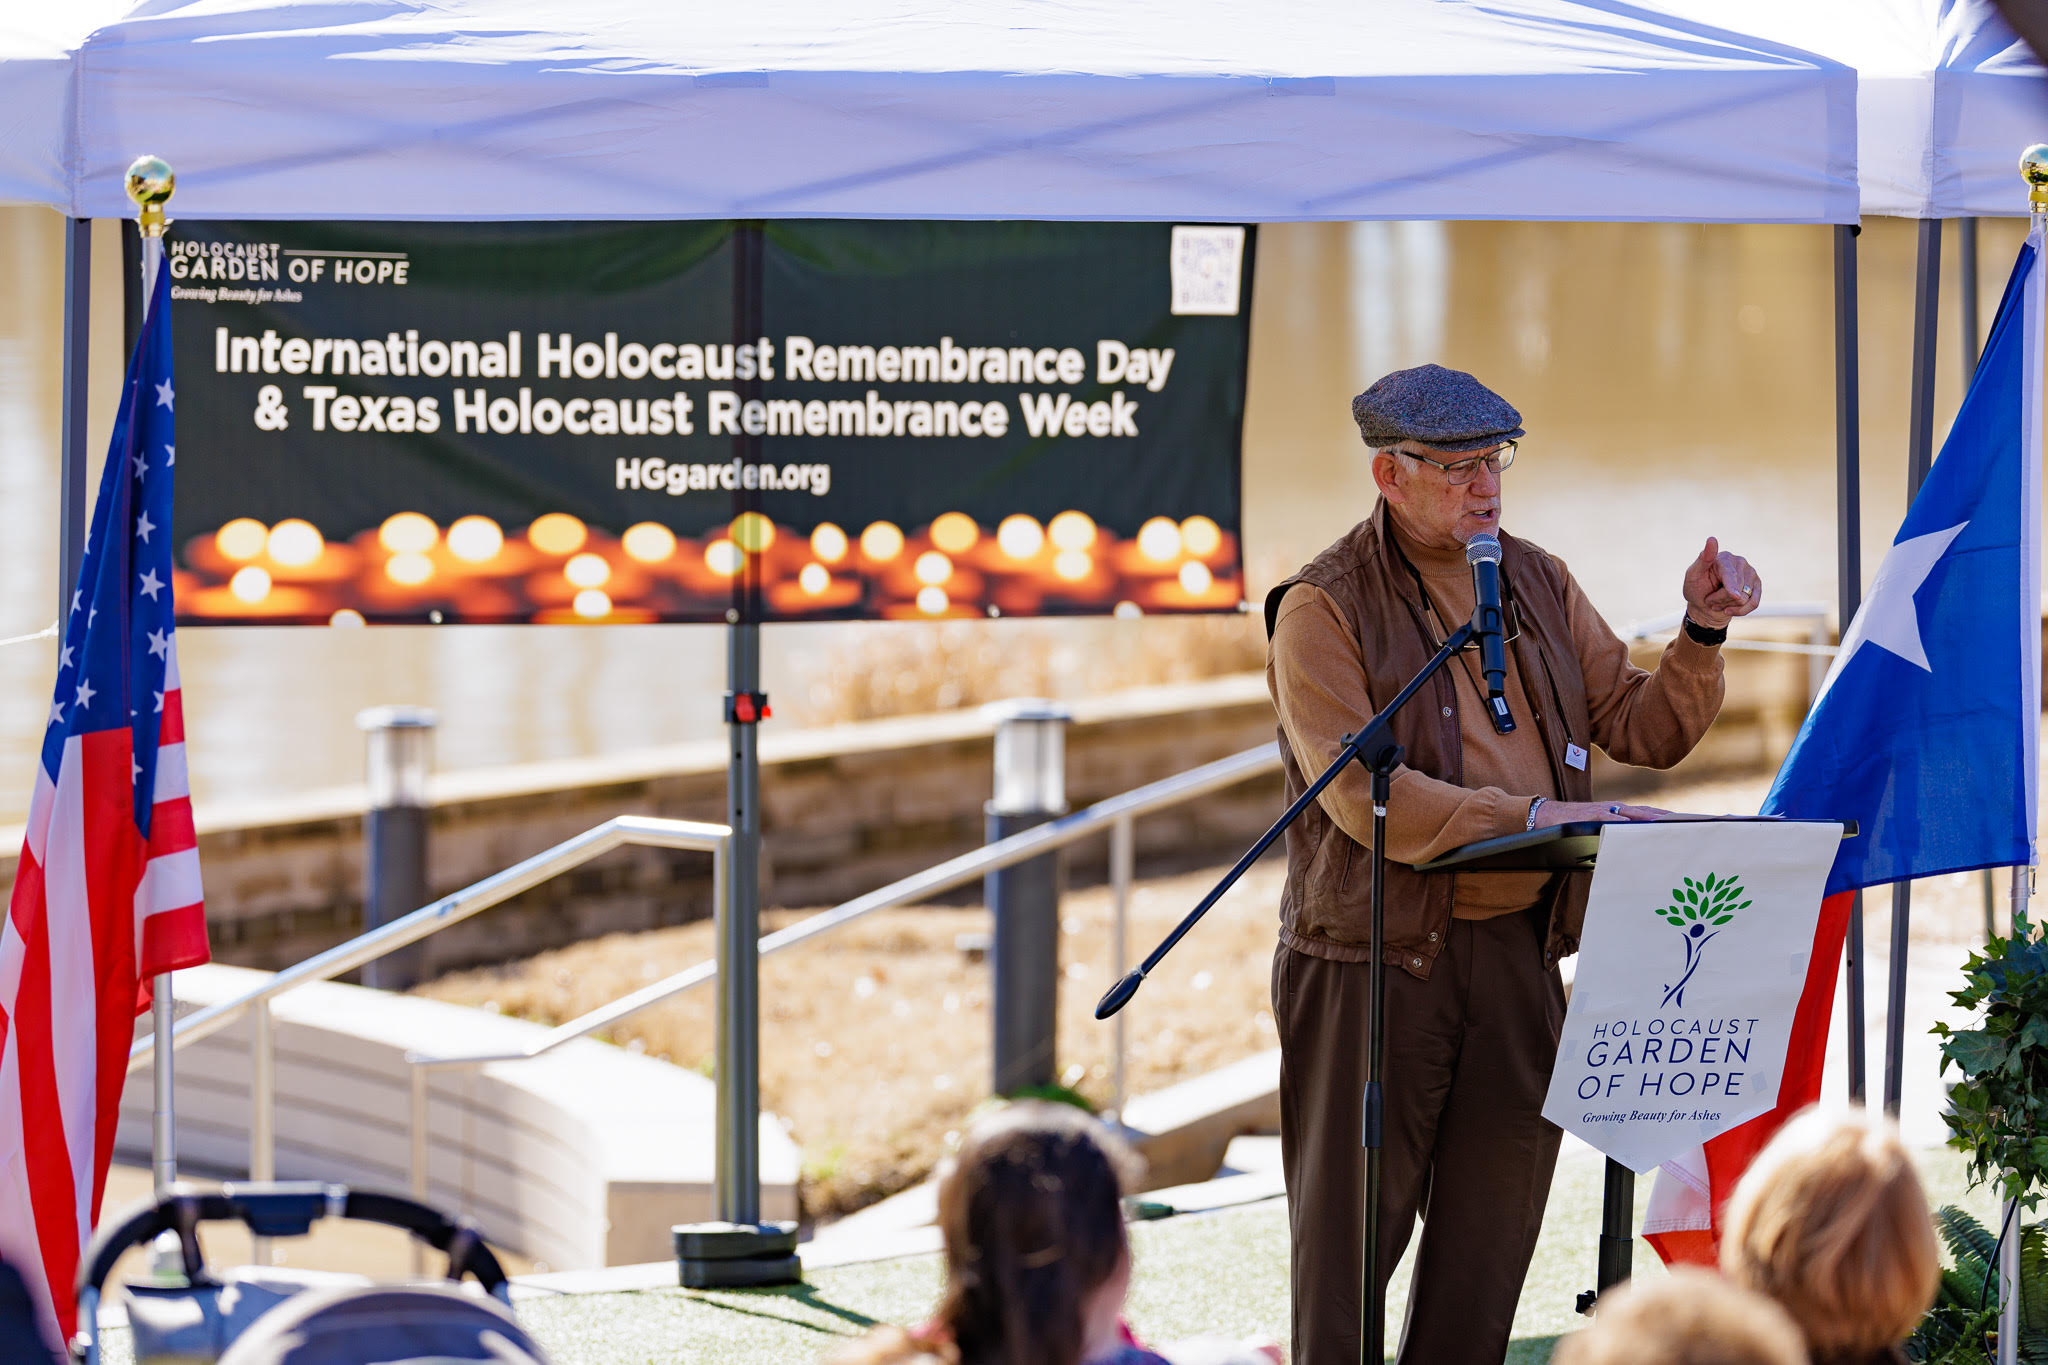 You are currently viewing International Holocaust Remembrance Day at the Holocaust Garden of Hope